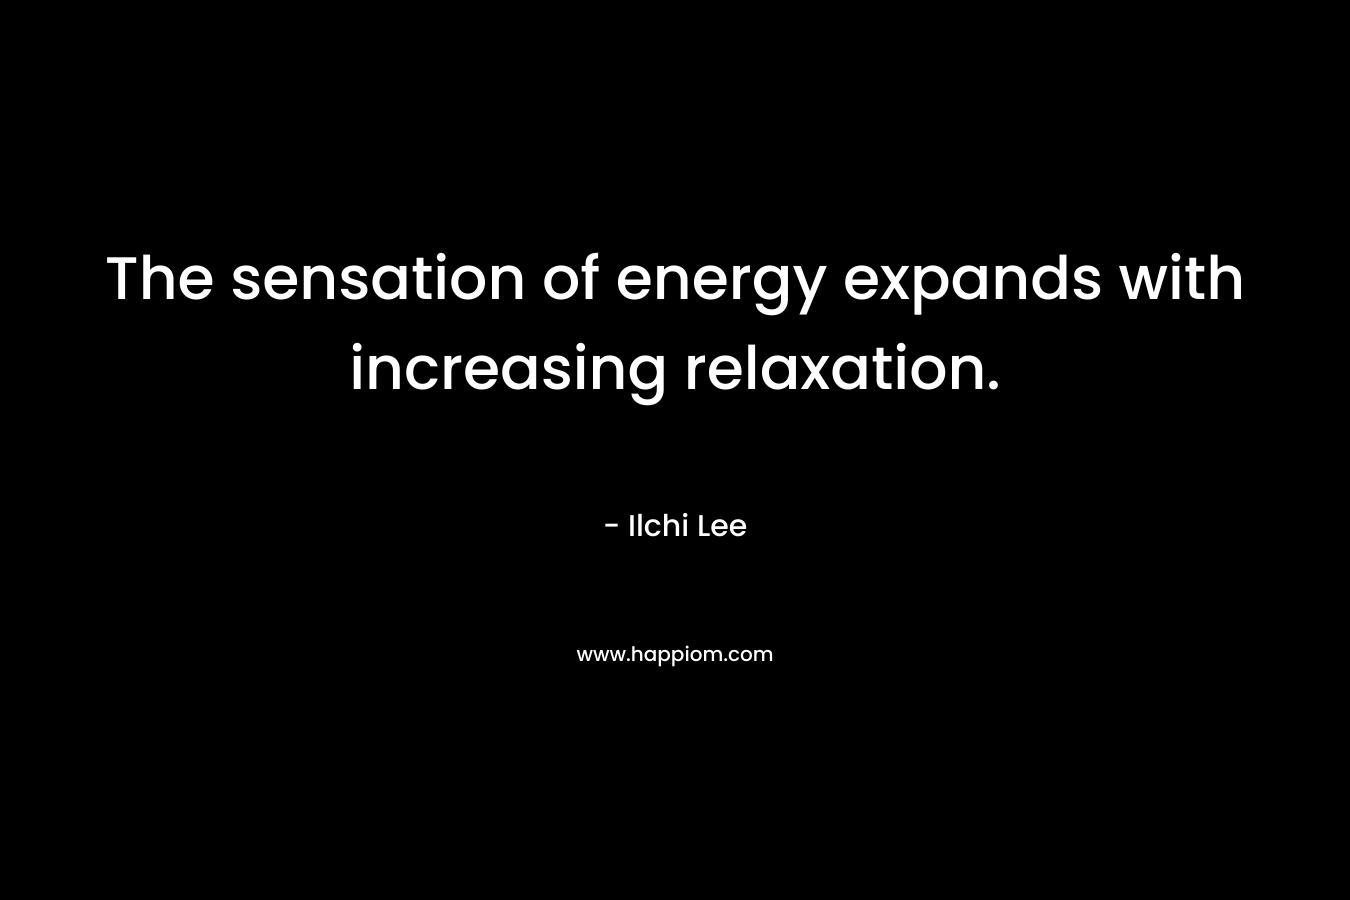 The sensation of energy expands with increasing relaxation. – Ilchi Lee